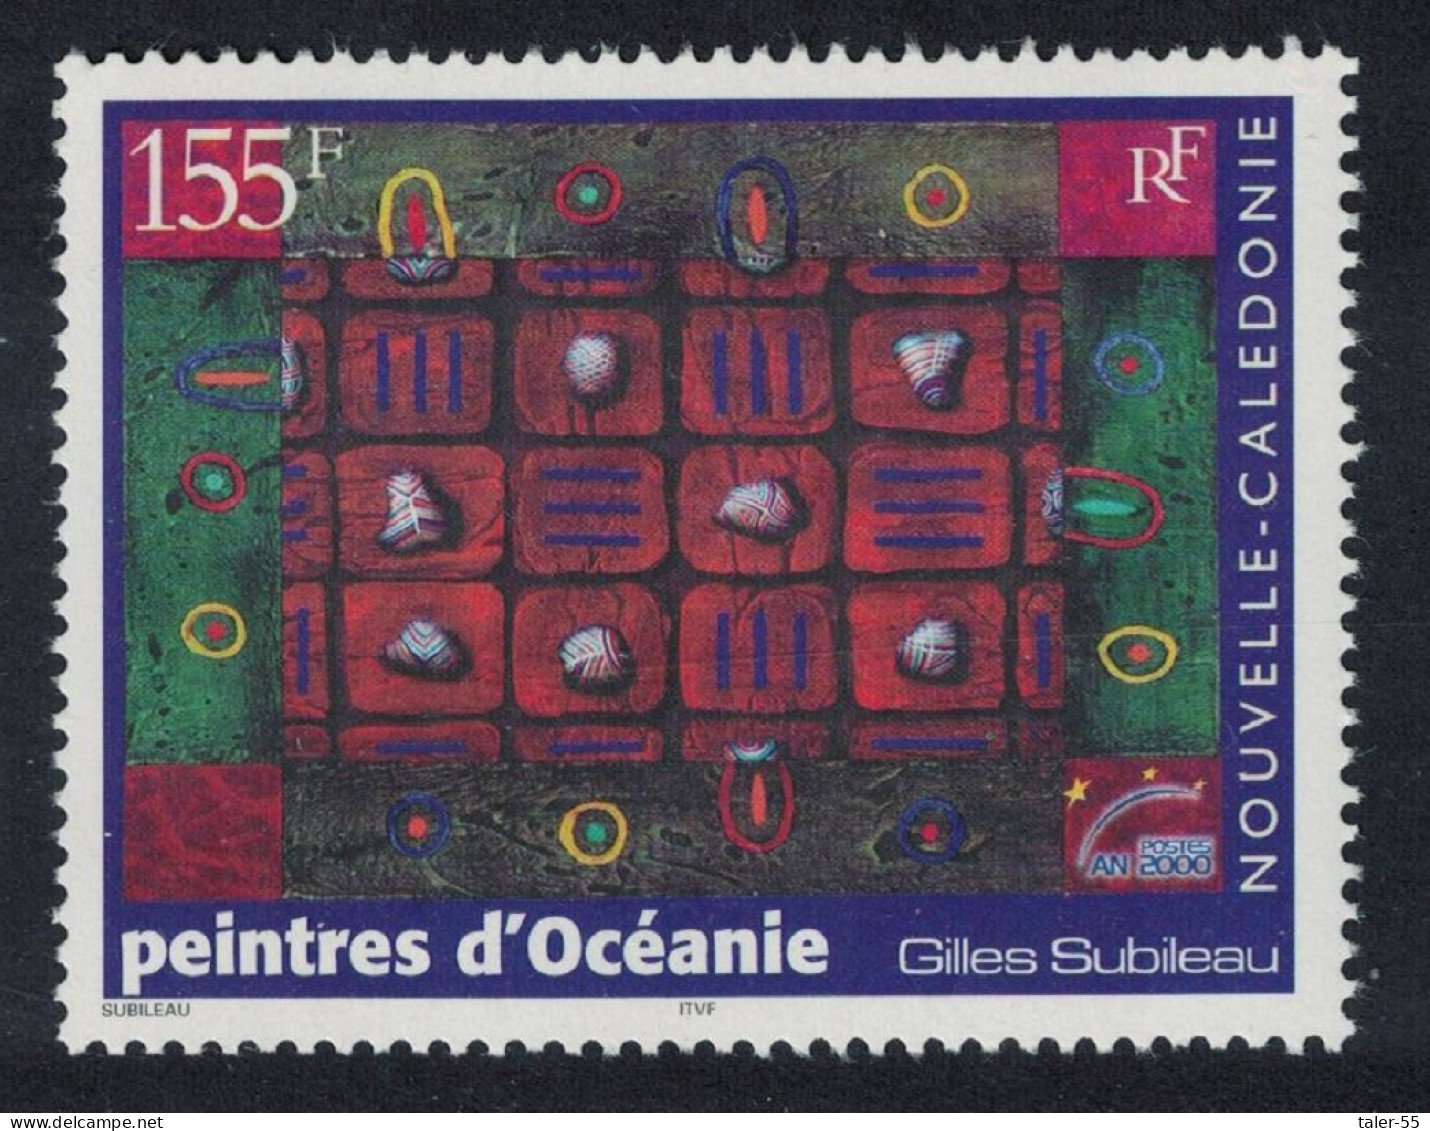 New Caledonia 'Painted Shells' By Gilles Subileau Pacific Painters 2000 MNH SG#1199 - Neufs